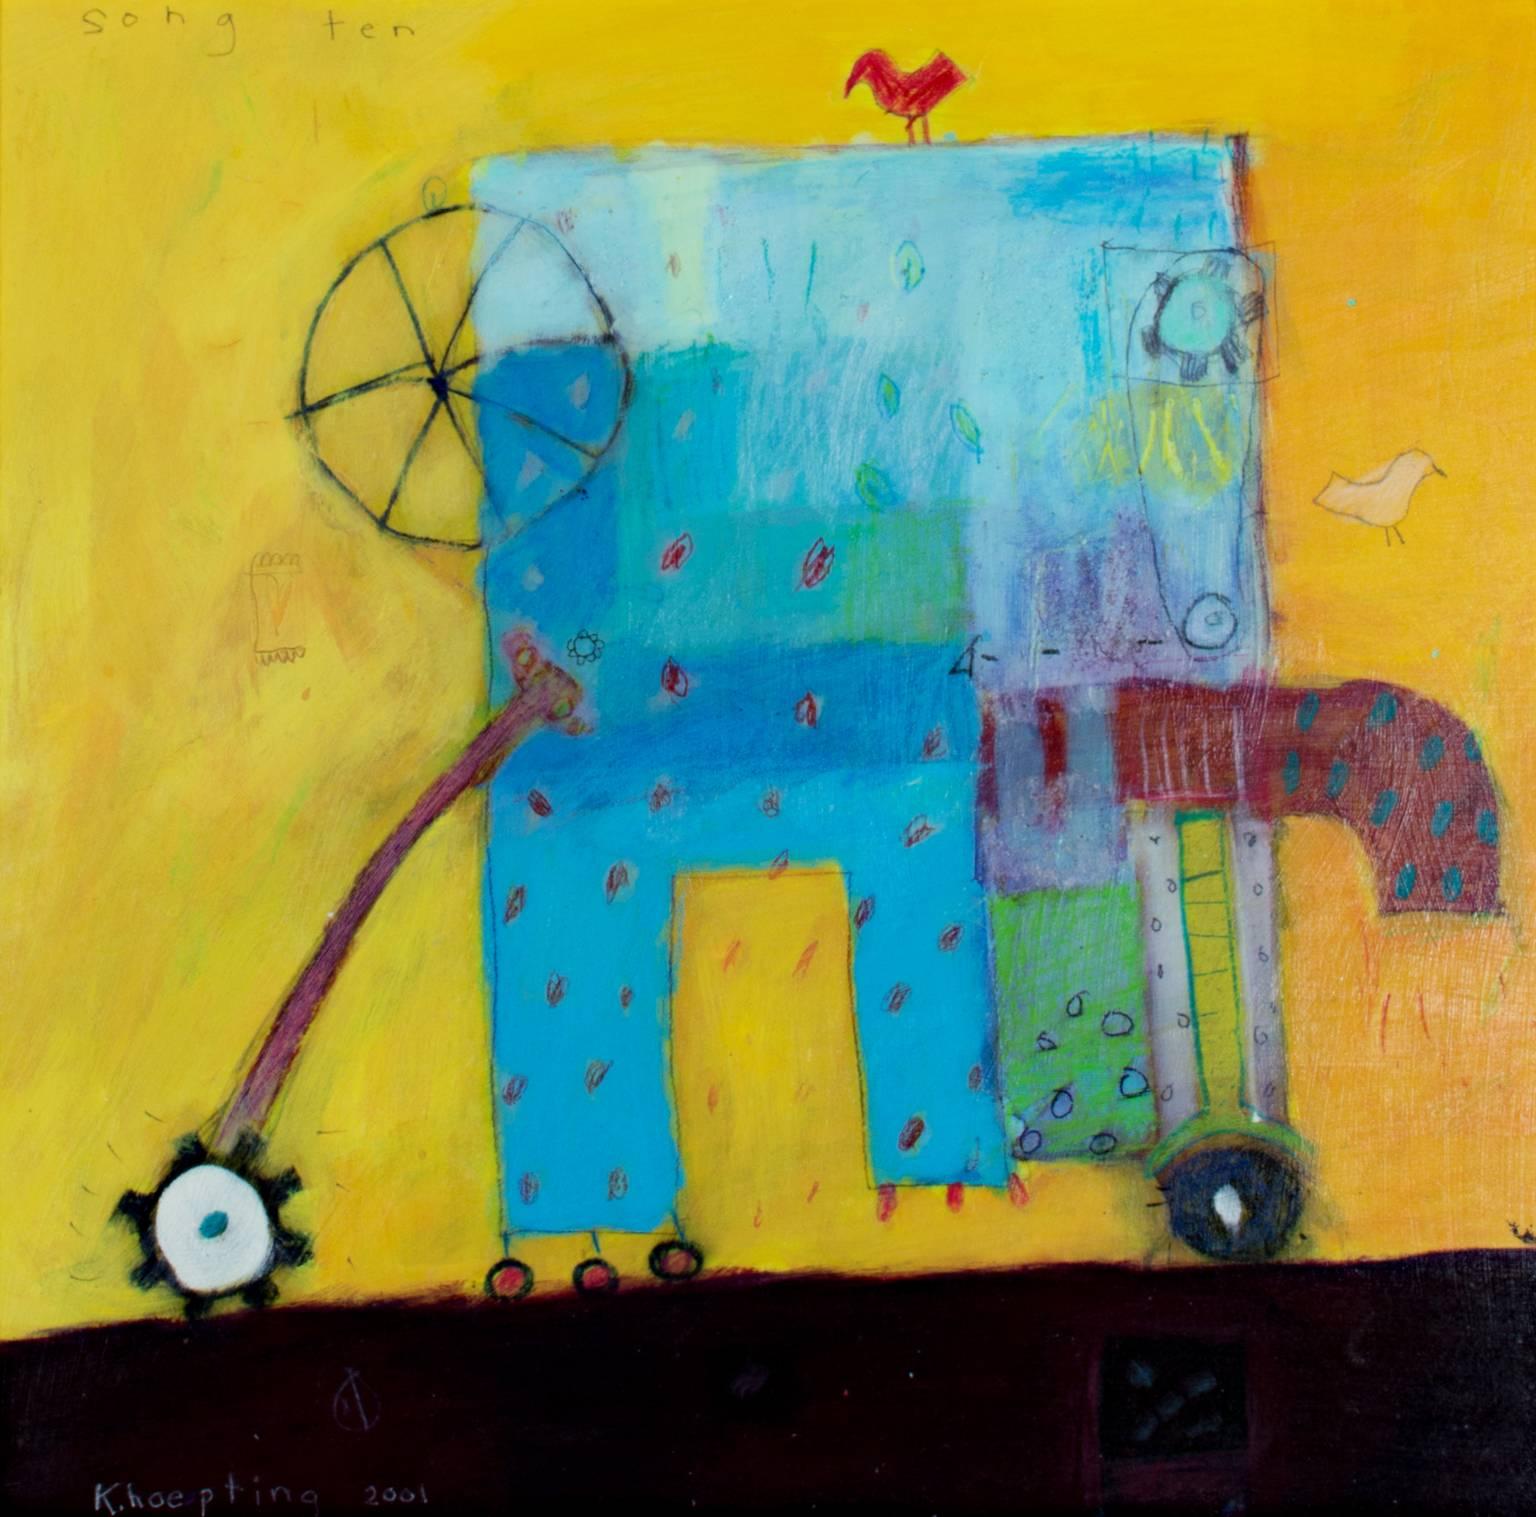 "Song Ten" is an original acrylic painting on paper by Karen Hoepting. It depicts a brightly-colored and abstracted machine. The artist signed the piece in the lower left and titled it in the upper left. 

15 1/2" x 15 1/2" art
25 3/8" x 25 3/8"